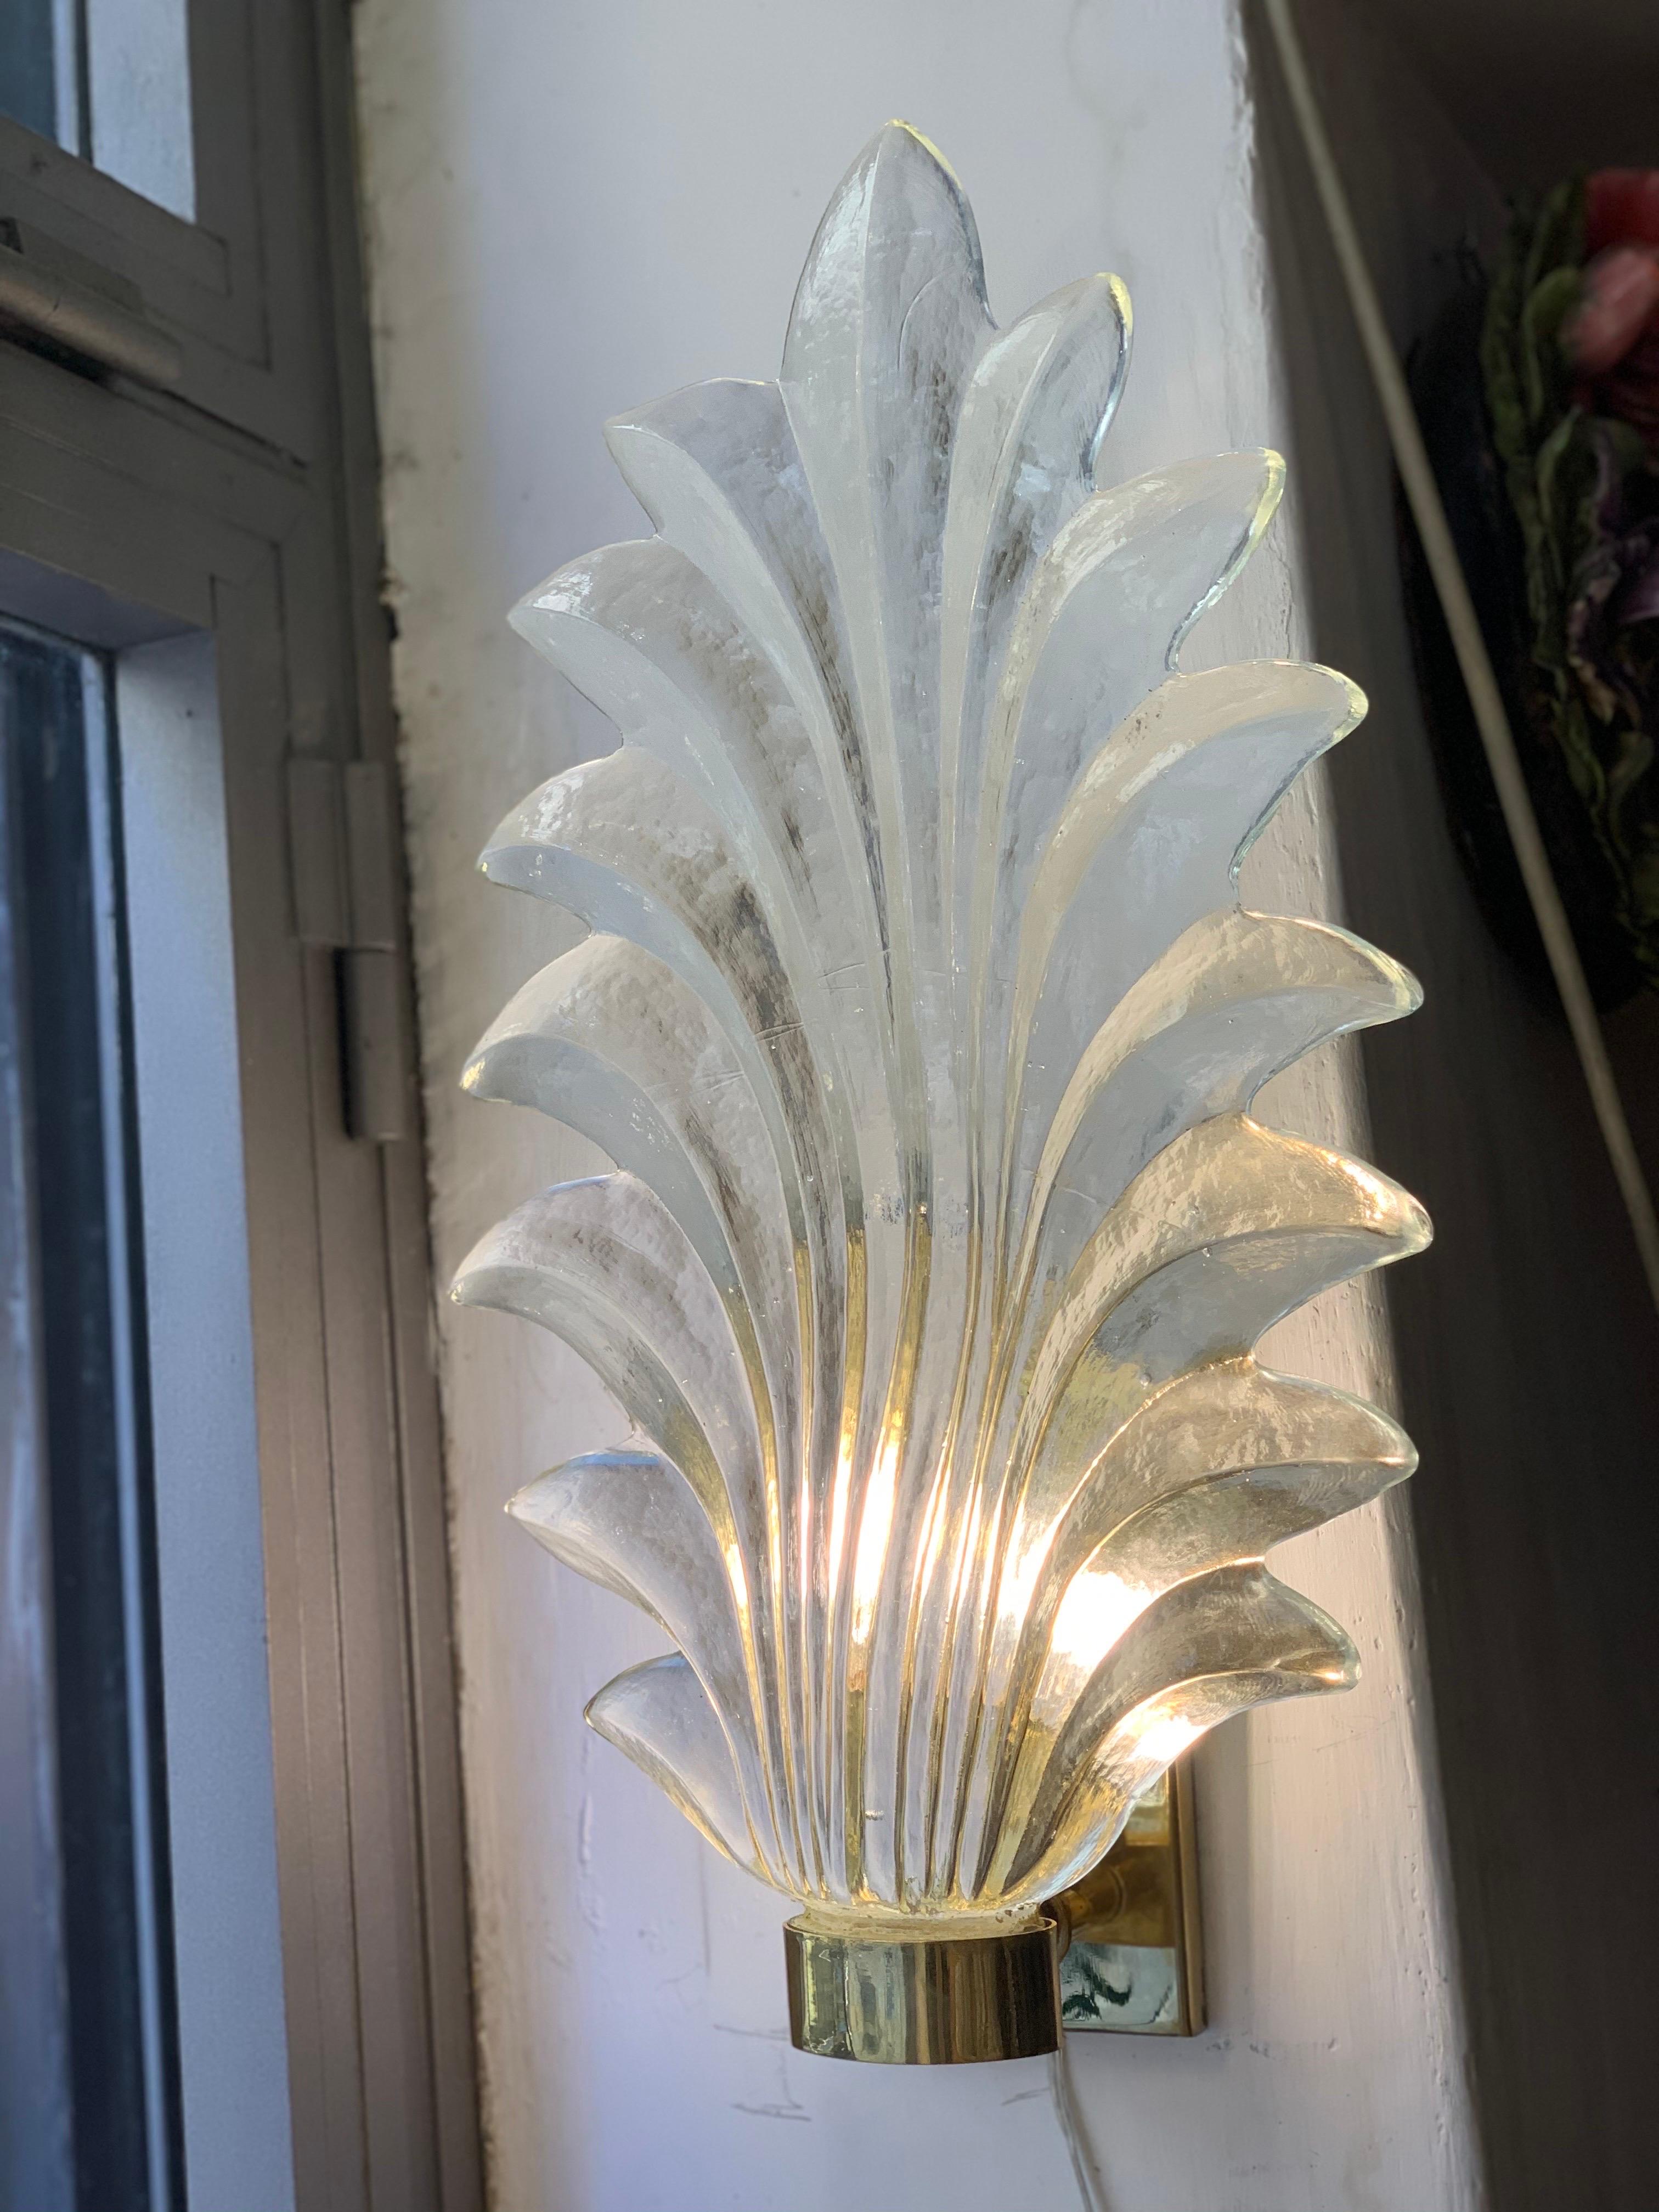 Pair of  Late Art Deco Clear Murano glass leaf sconces, brass structure, one bulb each lamp. These sconces are in Murano hand blown thick clear glass.